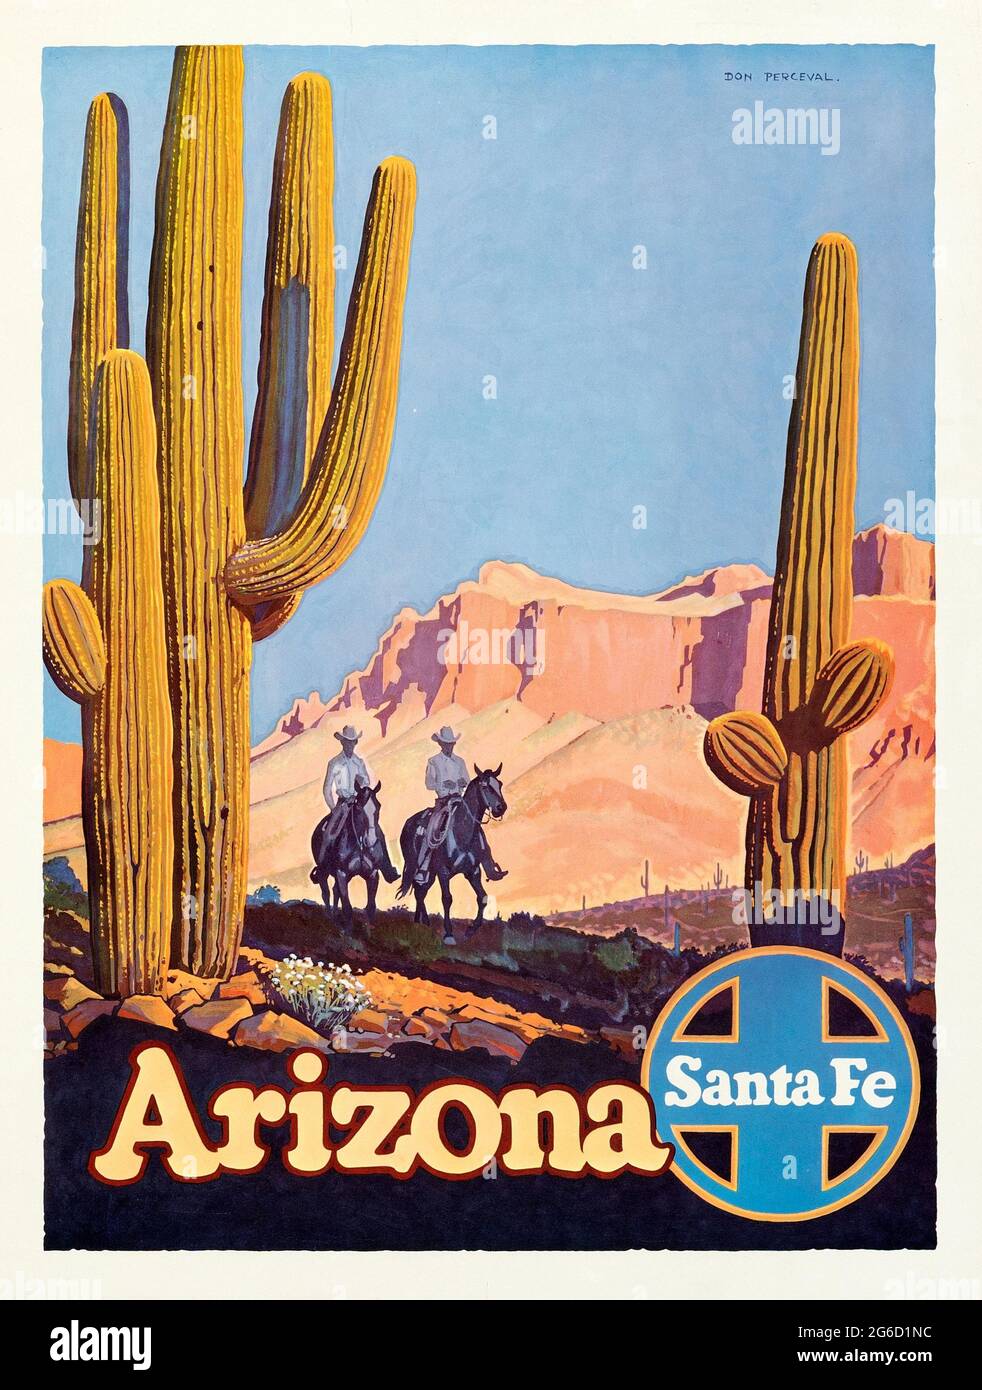 TRAVEL POSTER: Arizona Santa Fe Railroad – United States of America. 1940s. A couple of cowboys riding on horses. Two big cactuses in front. Stock Photo